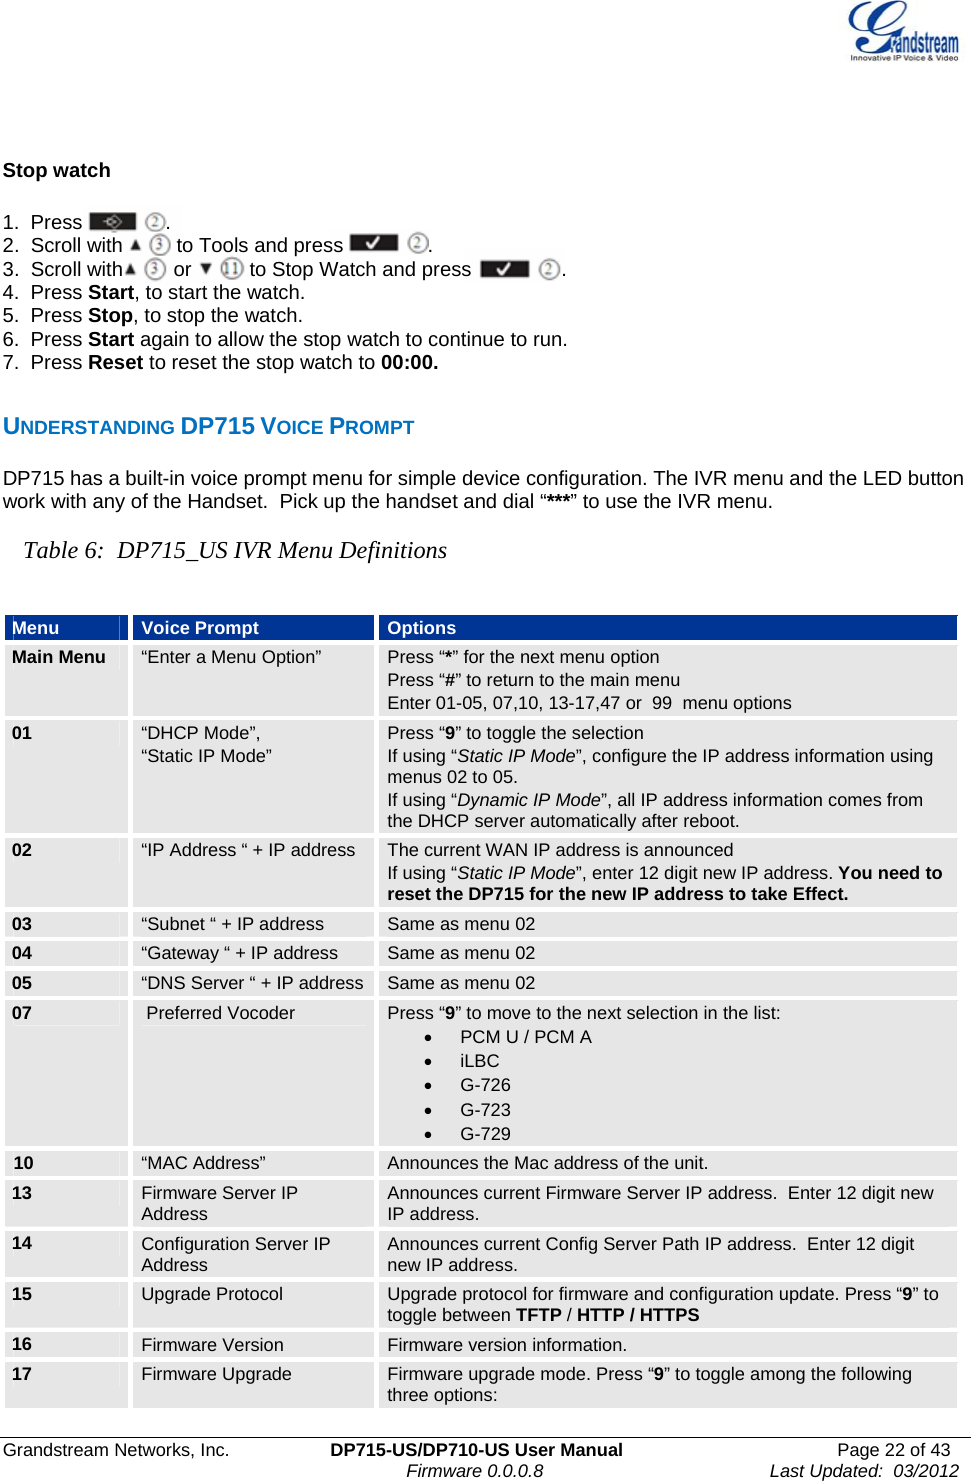  Grandstream Networks, Inc.  DP715-US/DP710-US User Manual  Page 22 of 43                                                                               Firmware 0.0.0.8                                     Last Updated:  03/2012  Stop watch  1.  Press      . 2.  Scroll with        to Tools and press               . 3.  Scroll with         or        to Stop Watch and press                . 4.  Press Start, to start the watch. 5.  Press Stop, to stop the watch. 6.  Press Start again to allow the stop watch to continue to run. 7.  Press Reset to reset the stop watch to 00:00.  UNDERSTANDING DP715 VOICE PROMPT DP715 has a built-in voice prompt menu for simple device configuration. The IVR menu and the LED button work with any of the Handset.  Pick up the handset and dial “***” to use the IVR menu.   Table 6:  DP715_US IVR Menu Definitions   Menu  Voice Prompt  Options Main Menu  “Enter a Menu Option”  Press “*” for the next menu option Press “#” to return to the main menu Enter 01-05, 07,10, 13-17,47 or  99  menu options  01  “DHCP Mode”, “Static IP Mode” Press “9” to toggle the selection If using “Static IP Mode”, configure the IP address information using menus 02 to 05.  If using “Dynamic IP Mode”, all IP address information comes from the DHCP server automatically after reboot. 02  “IP Address “ + IP address  The current WAN IP address is announced If using “Static IP Mode”, enter 12 digit new IP address. You need to reset the DP715 for the new IP address to take Effect. 03  “Subnet “ + IP address  Same as menu 02 04  “Gateway “ + IP address  Same as menu 02 05  “DNS Server “ + IP address  Same as menu 02 07   Preferred Vocoder  Press “9” to move to the next selection in the list: •  PCM U / PCM A • iLBC • G-726 • G-723  •  G-729    10  “MAC Address”  Announces the Mac address of the unit. 13  Firmware Server IP Address  Announces current Firmware Server IP address.  Enter 12 digit new IP address. 14  Configuration Server IP Address  Announces current Config Server Path IP address.  Enter 12 digit new IP address. 15  Upgrade Protocol  Upgrade protocol for firmware and configuration update. Press “9” to toggle between TFTP / HTTP / HTTPS 16  Firmware Version  Firmware version information. 17  Firmware Upgrade  Firmware upgrade mode. Press “9” to toggle among the following three options: 